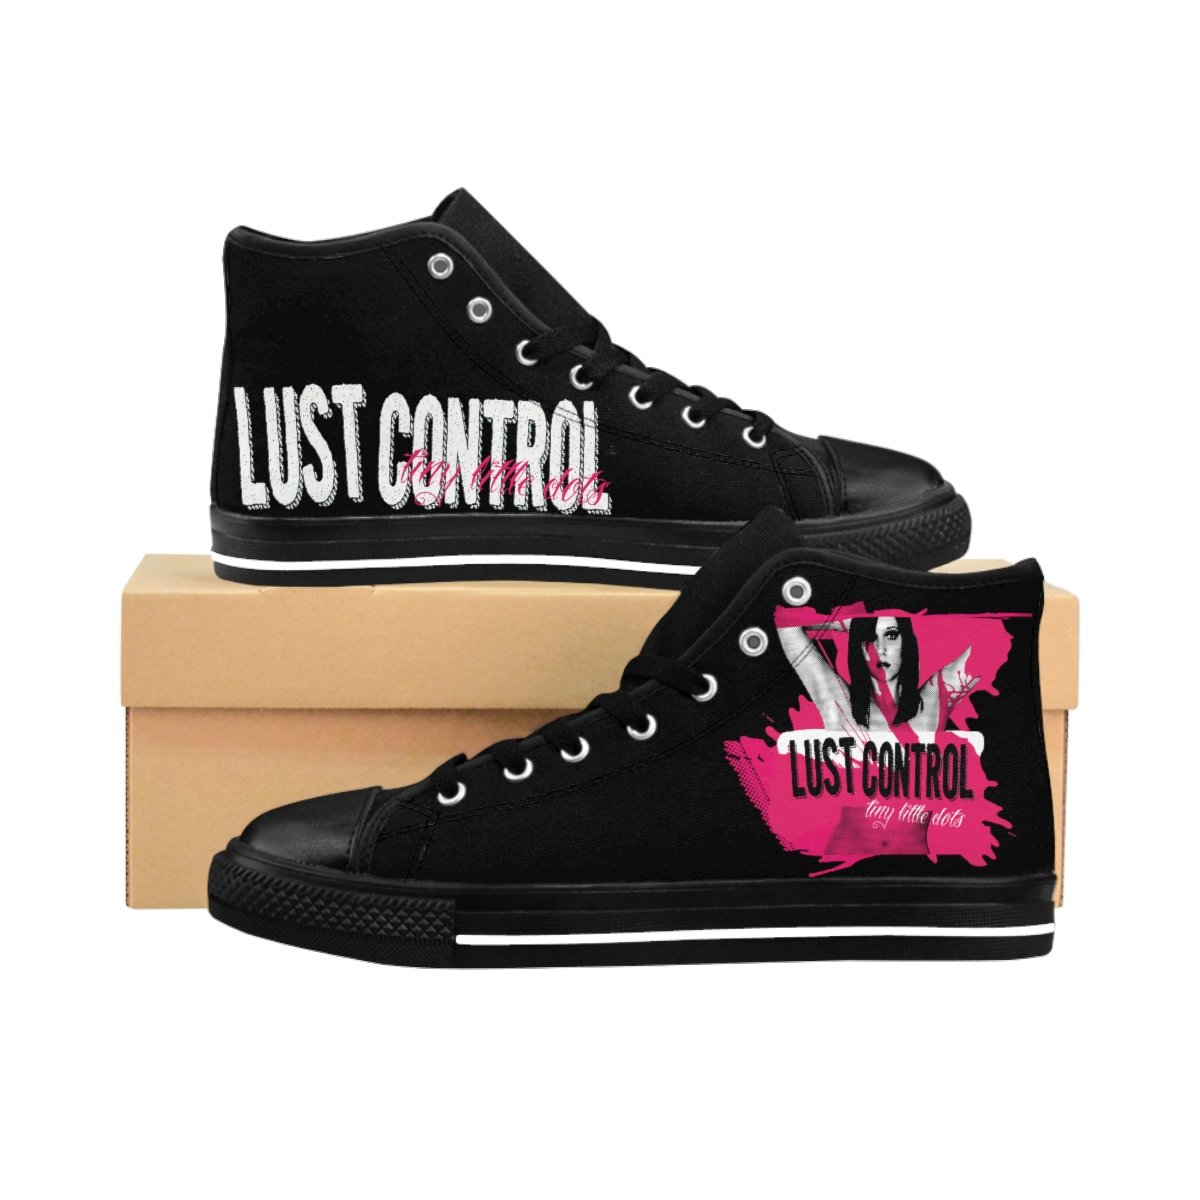 Lust Control – Tiny Little Dots Women’s High-top Sneakers